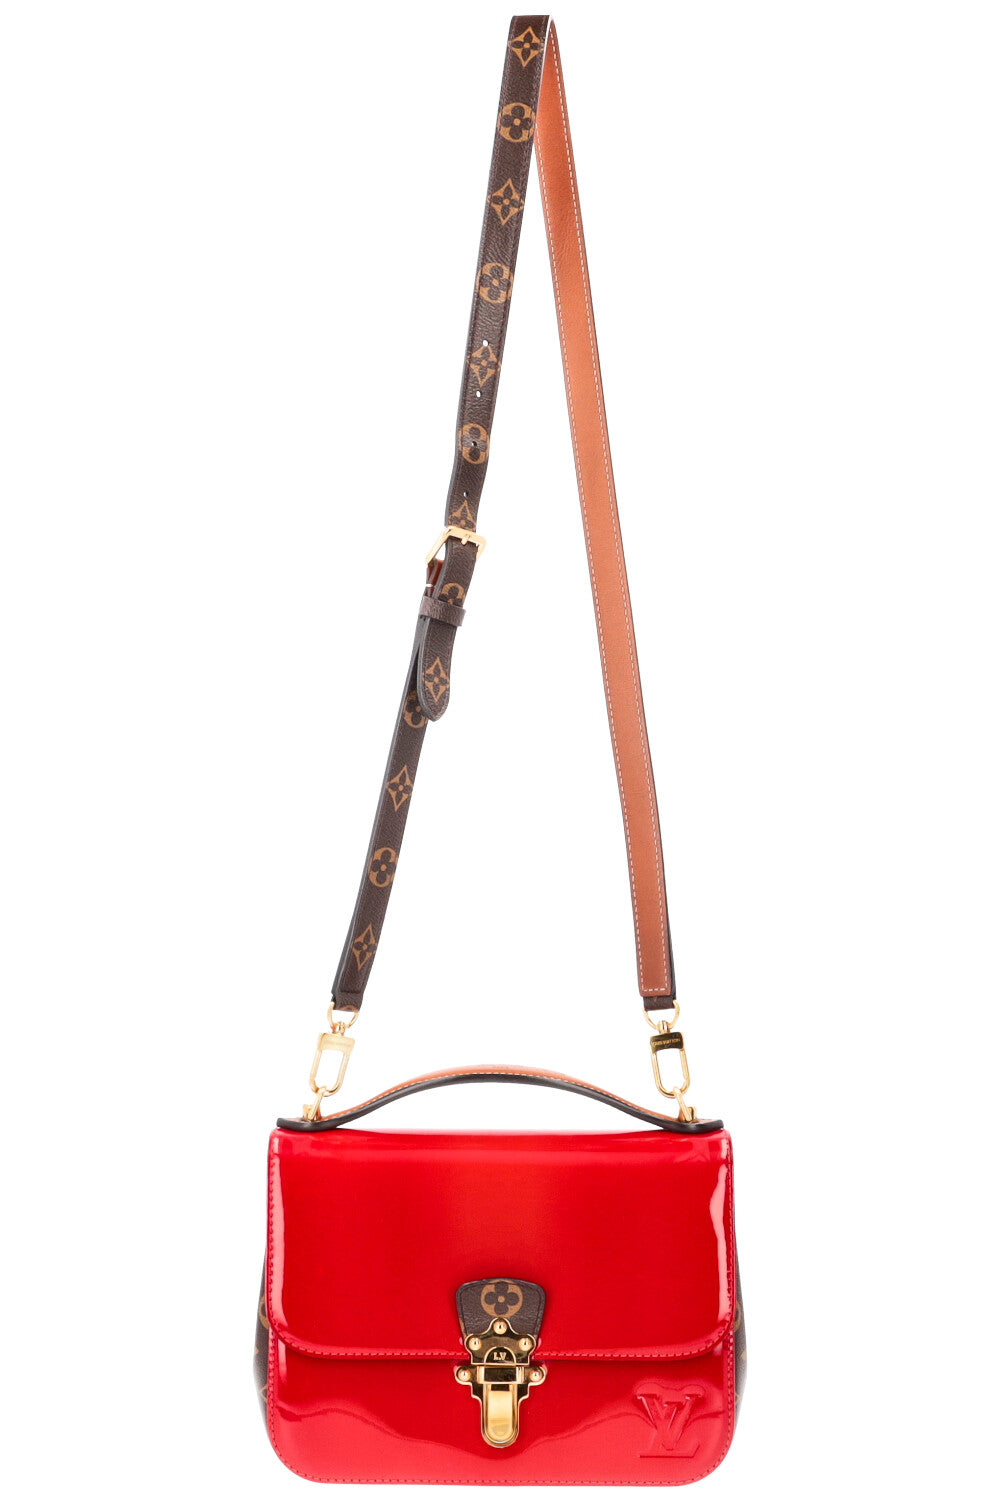 LOUIS VUITTON Cherrywood Bag Patent Red MNG